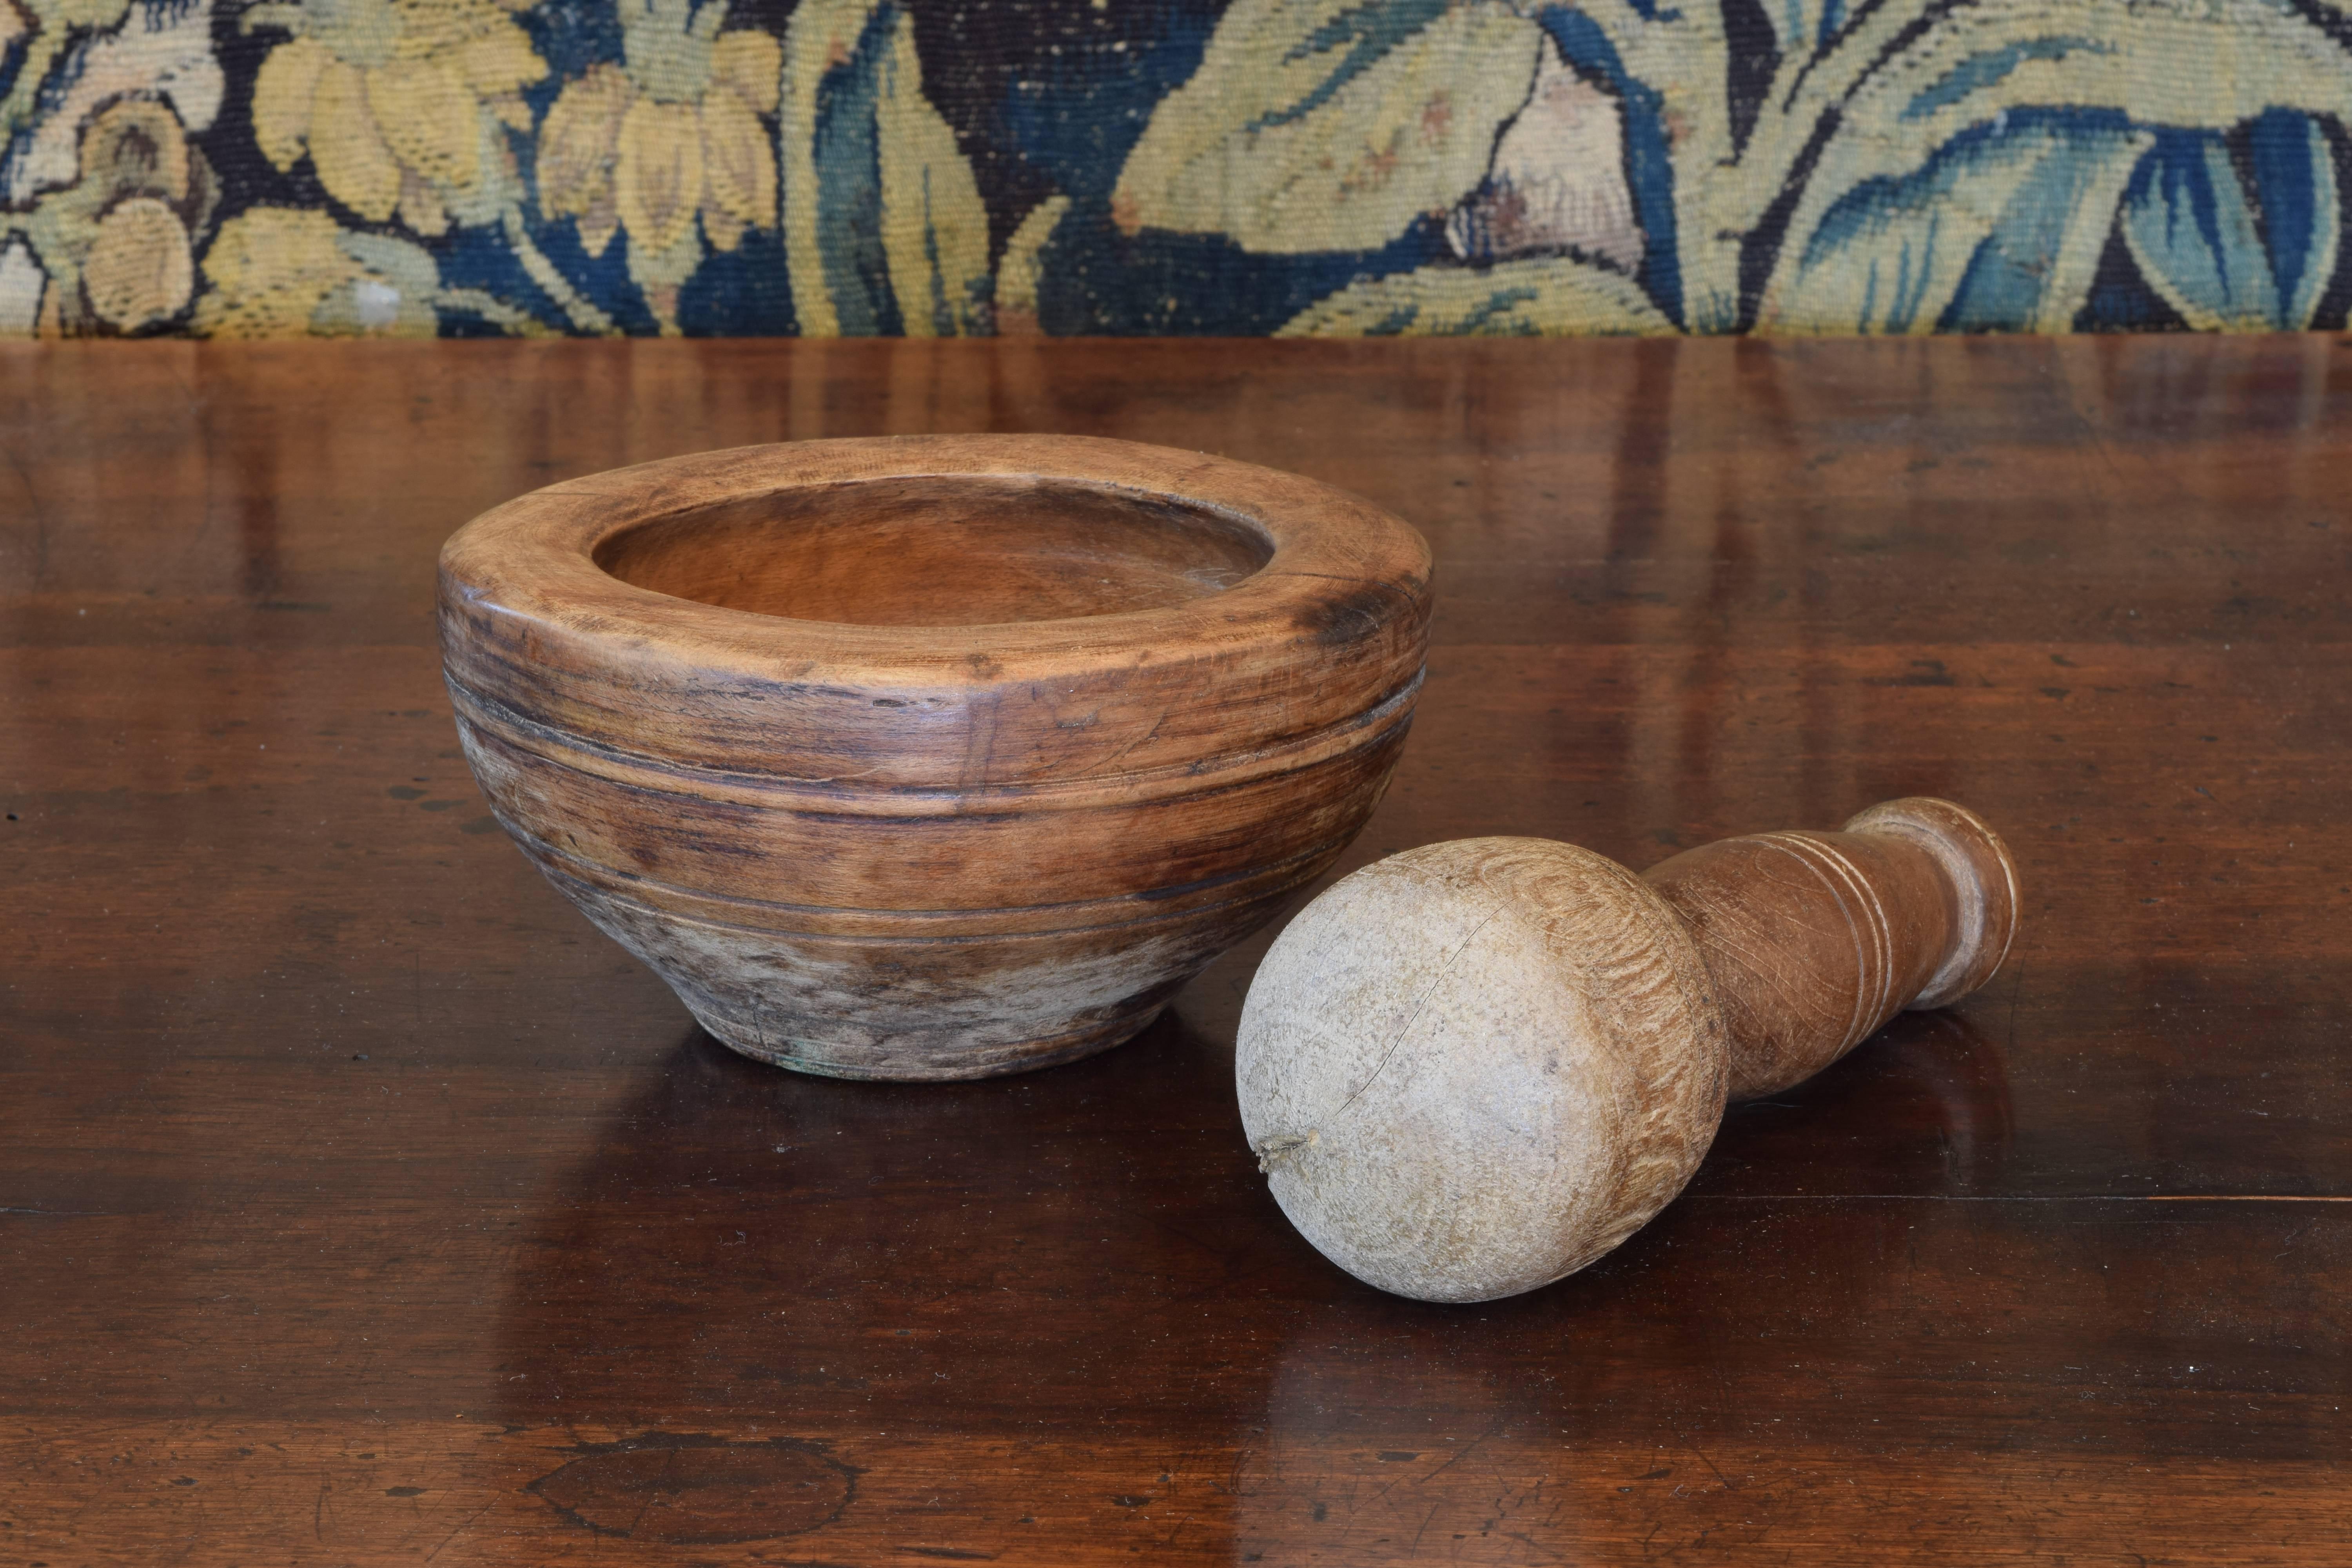 Both the mortar and pestle turned on a lathe and featuring string line decoration.